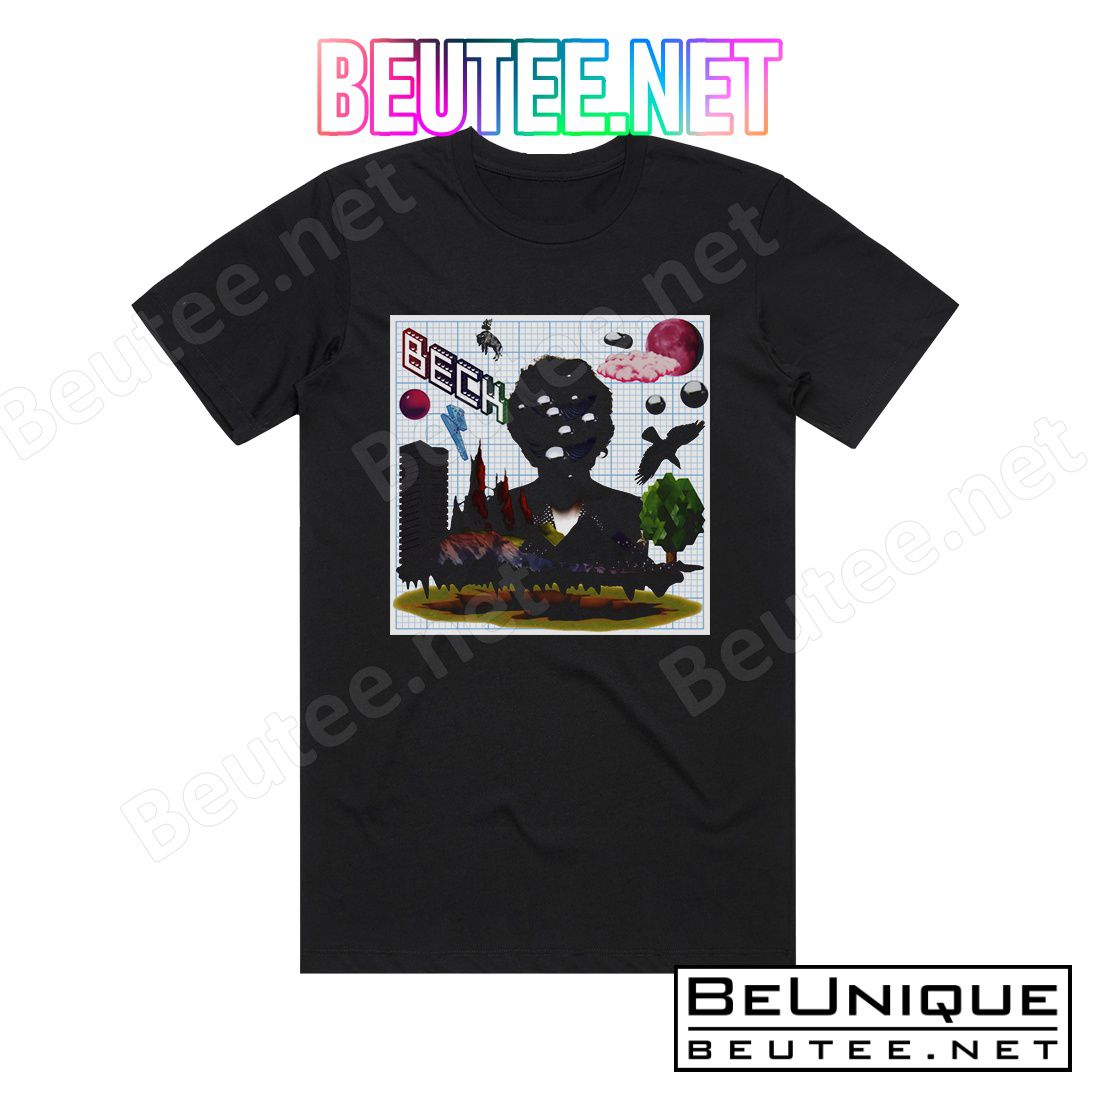 Beck The Information 2 Album Cover T-Shirt